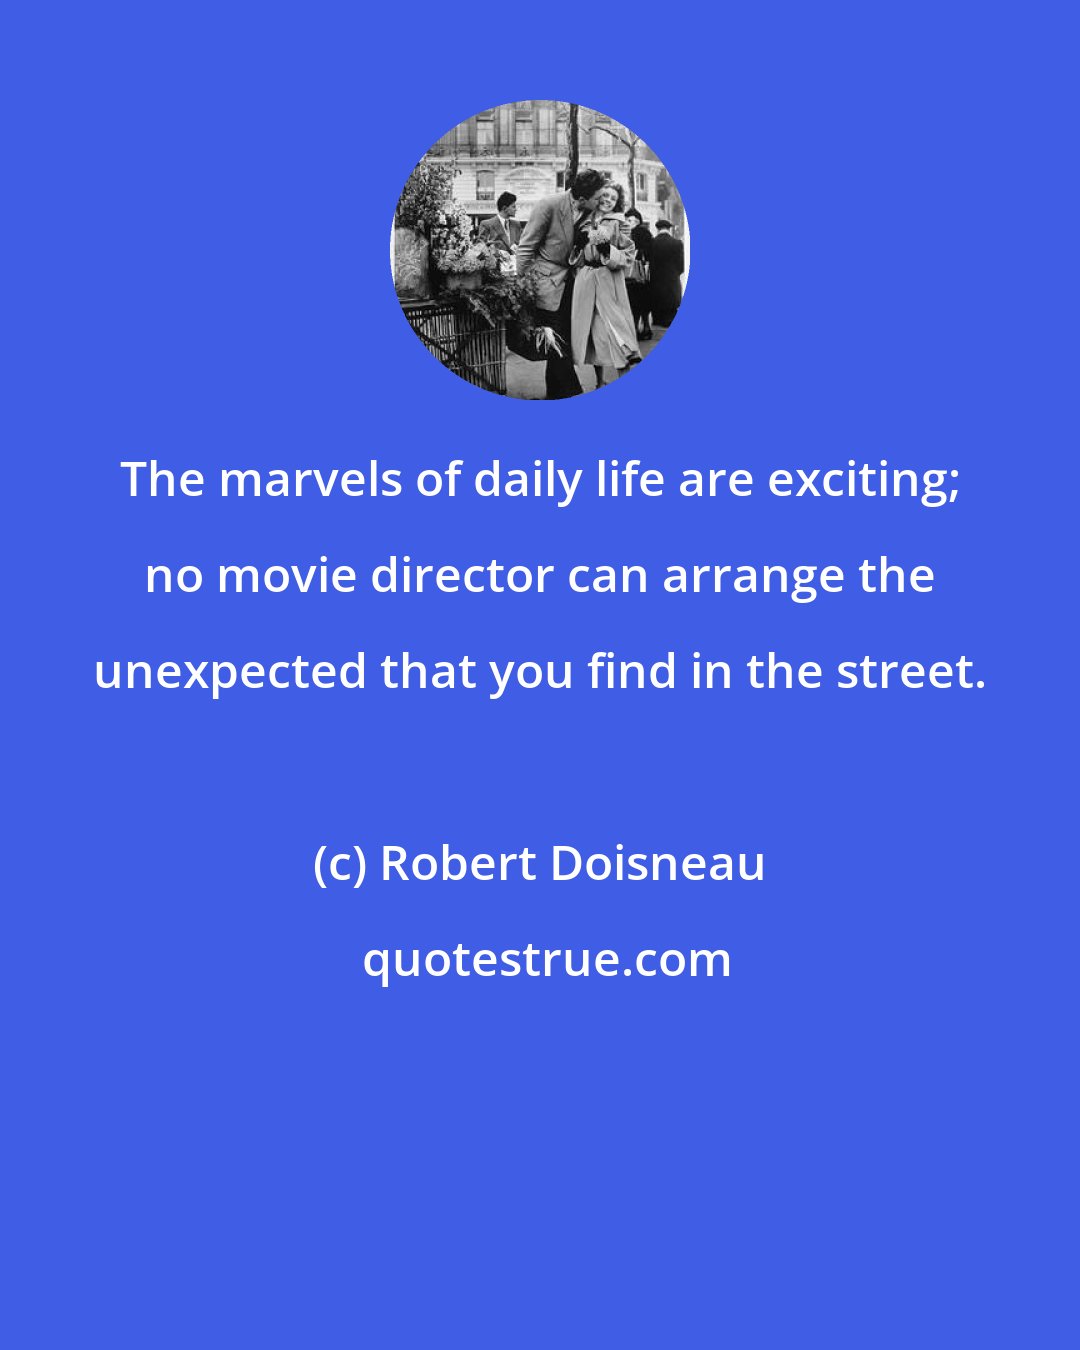 Robert Doisneau: The marvels of daily life are exciting; no movie director can arrange the unexpected that you find in the street.